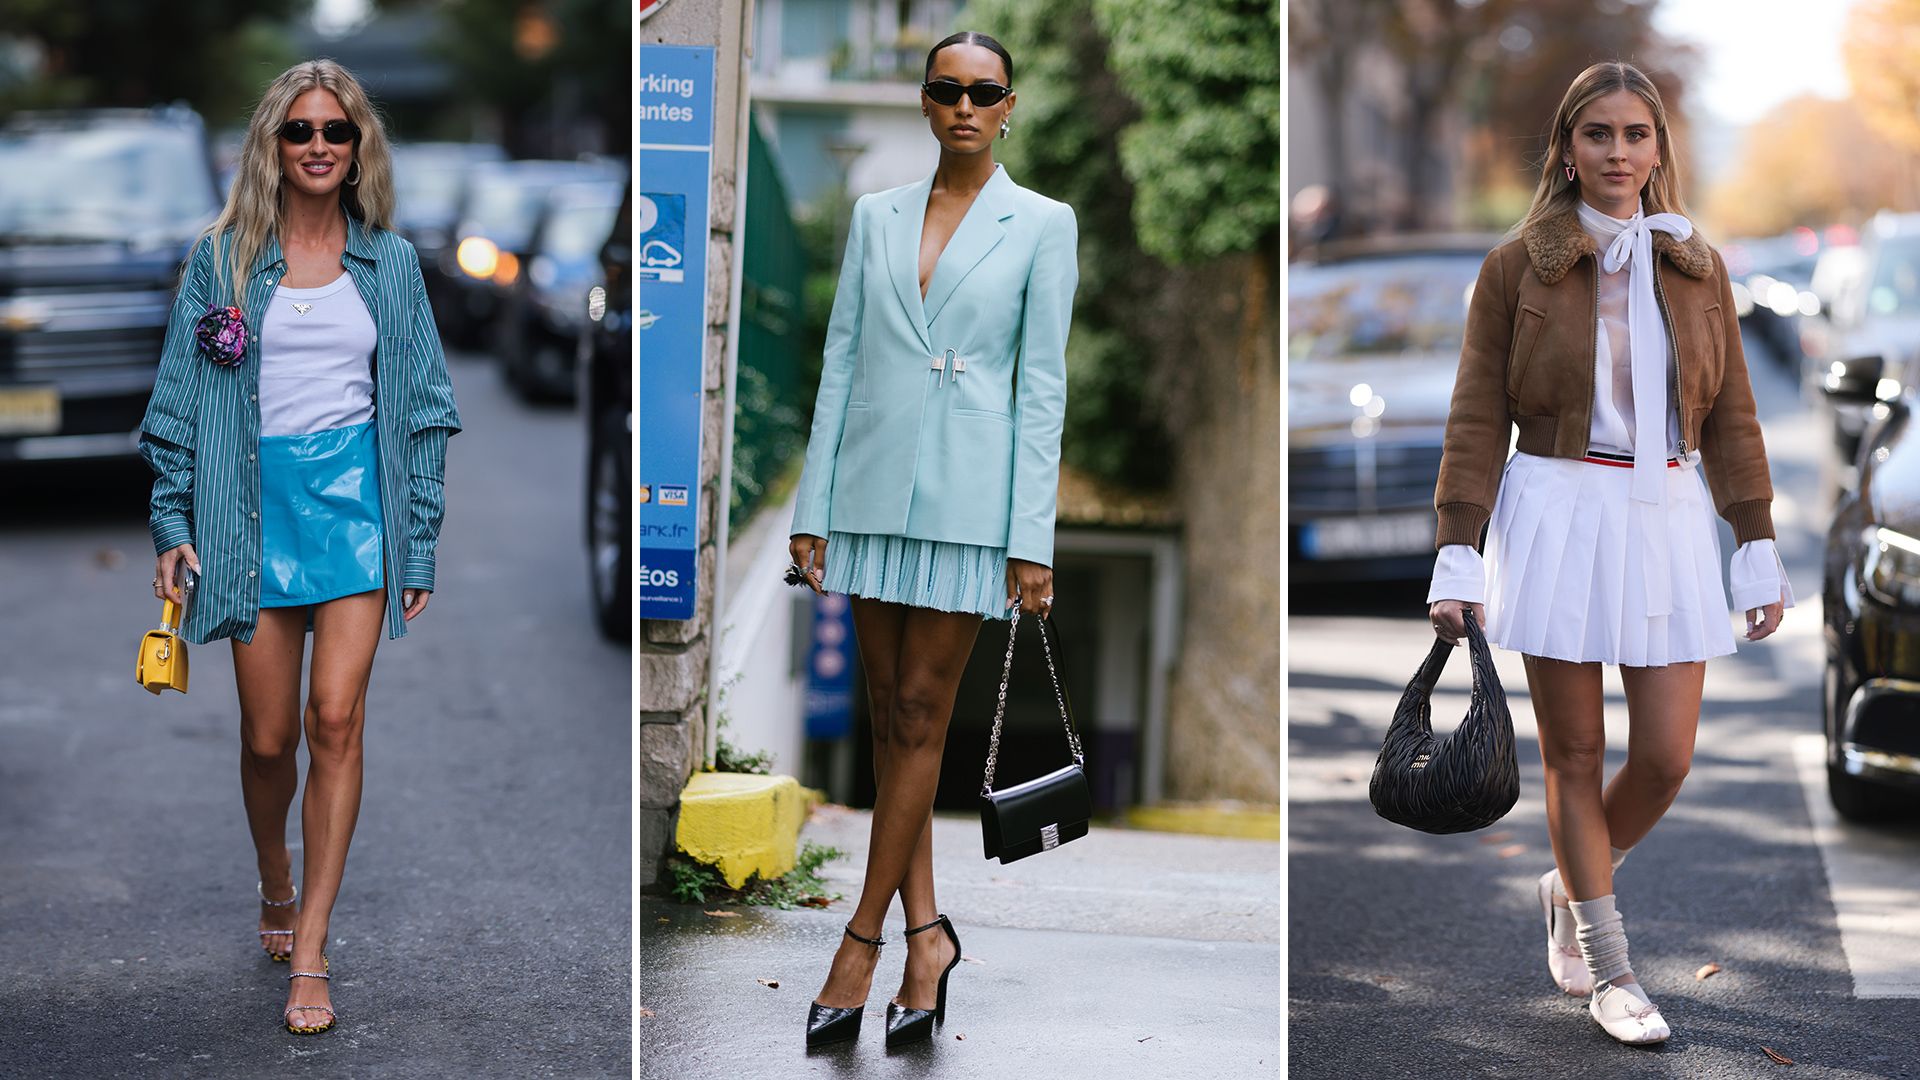 How to Pull Off Wearing a Skirt Under a Dress